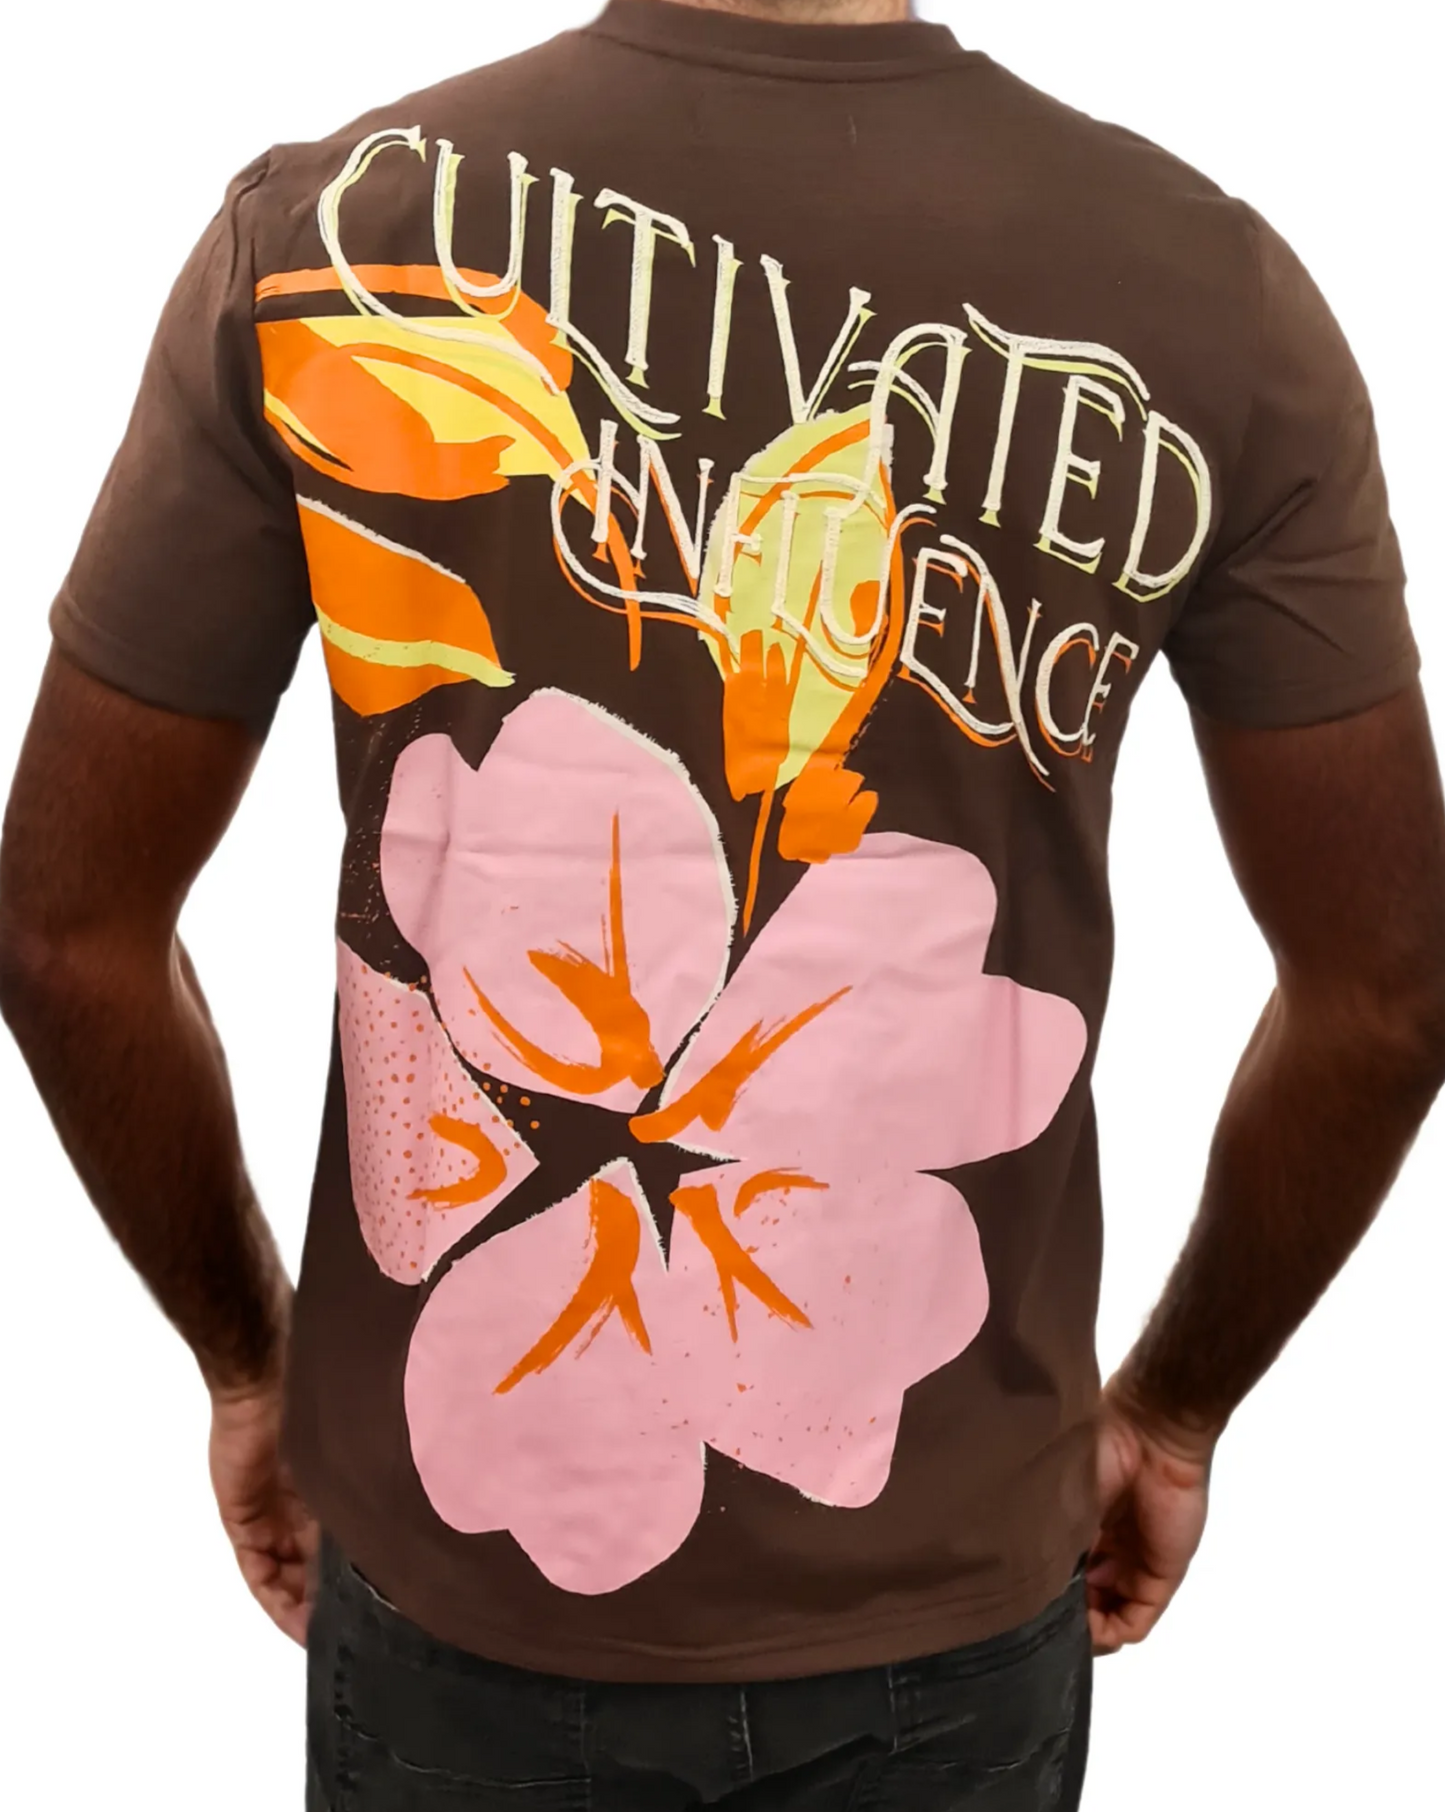 Cultivated Influence Shirt